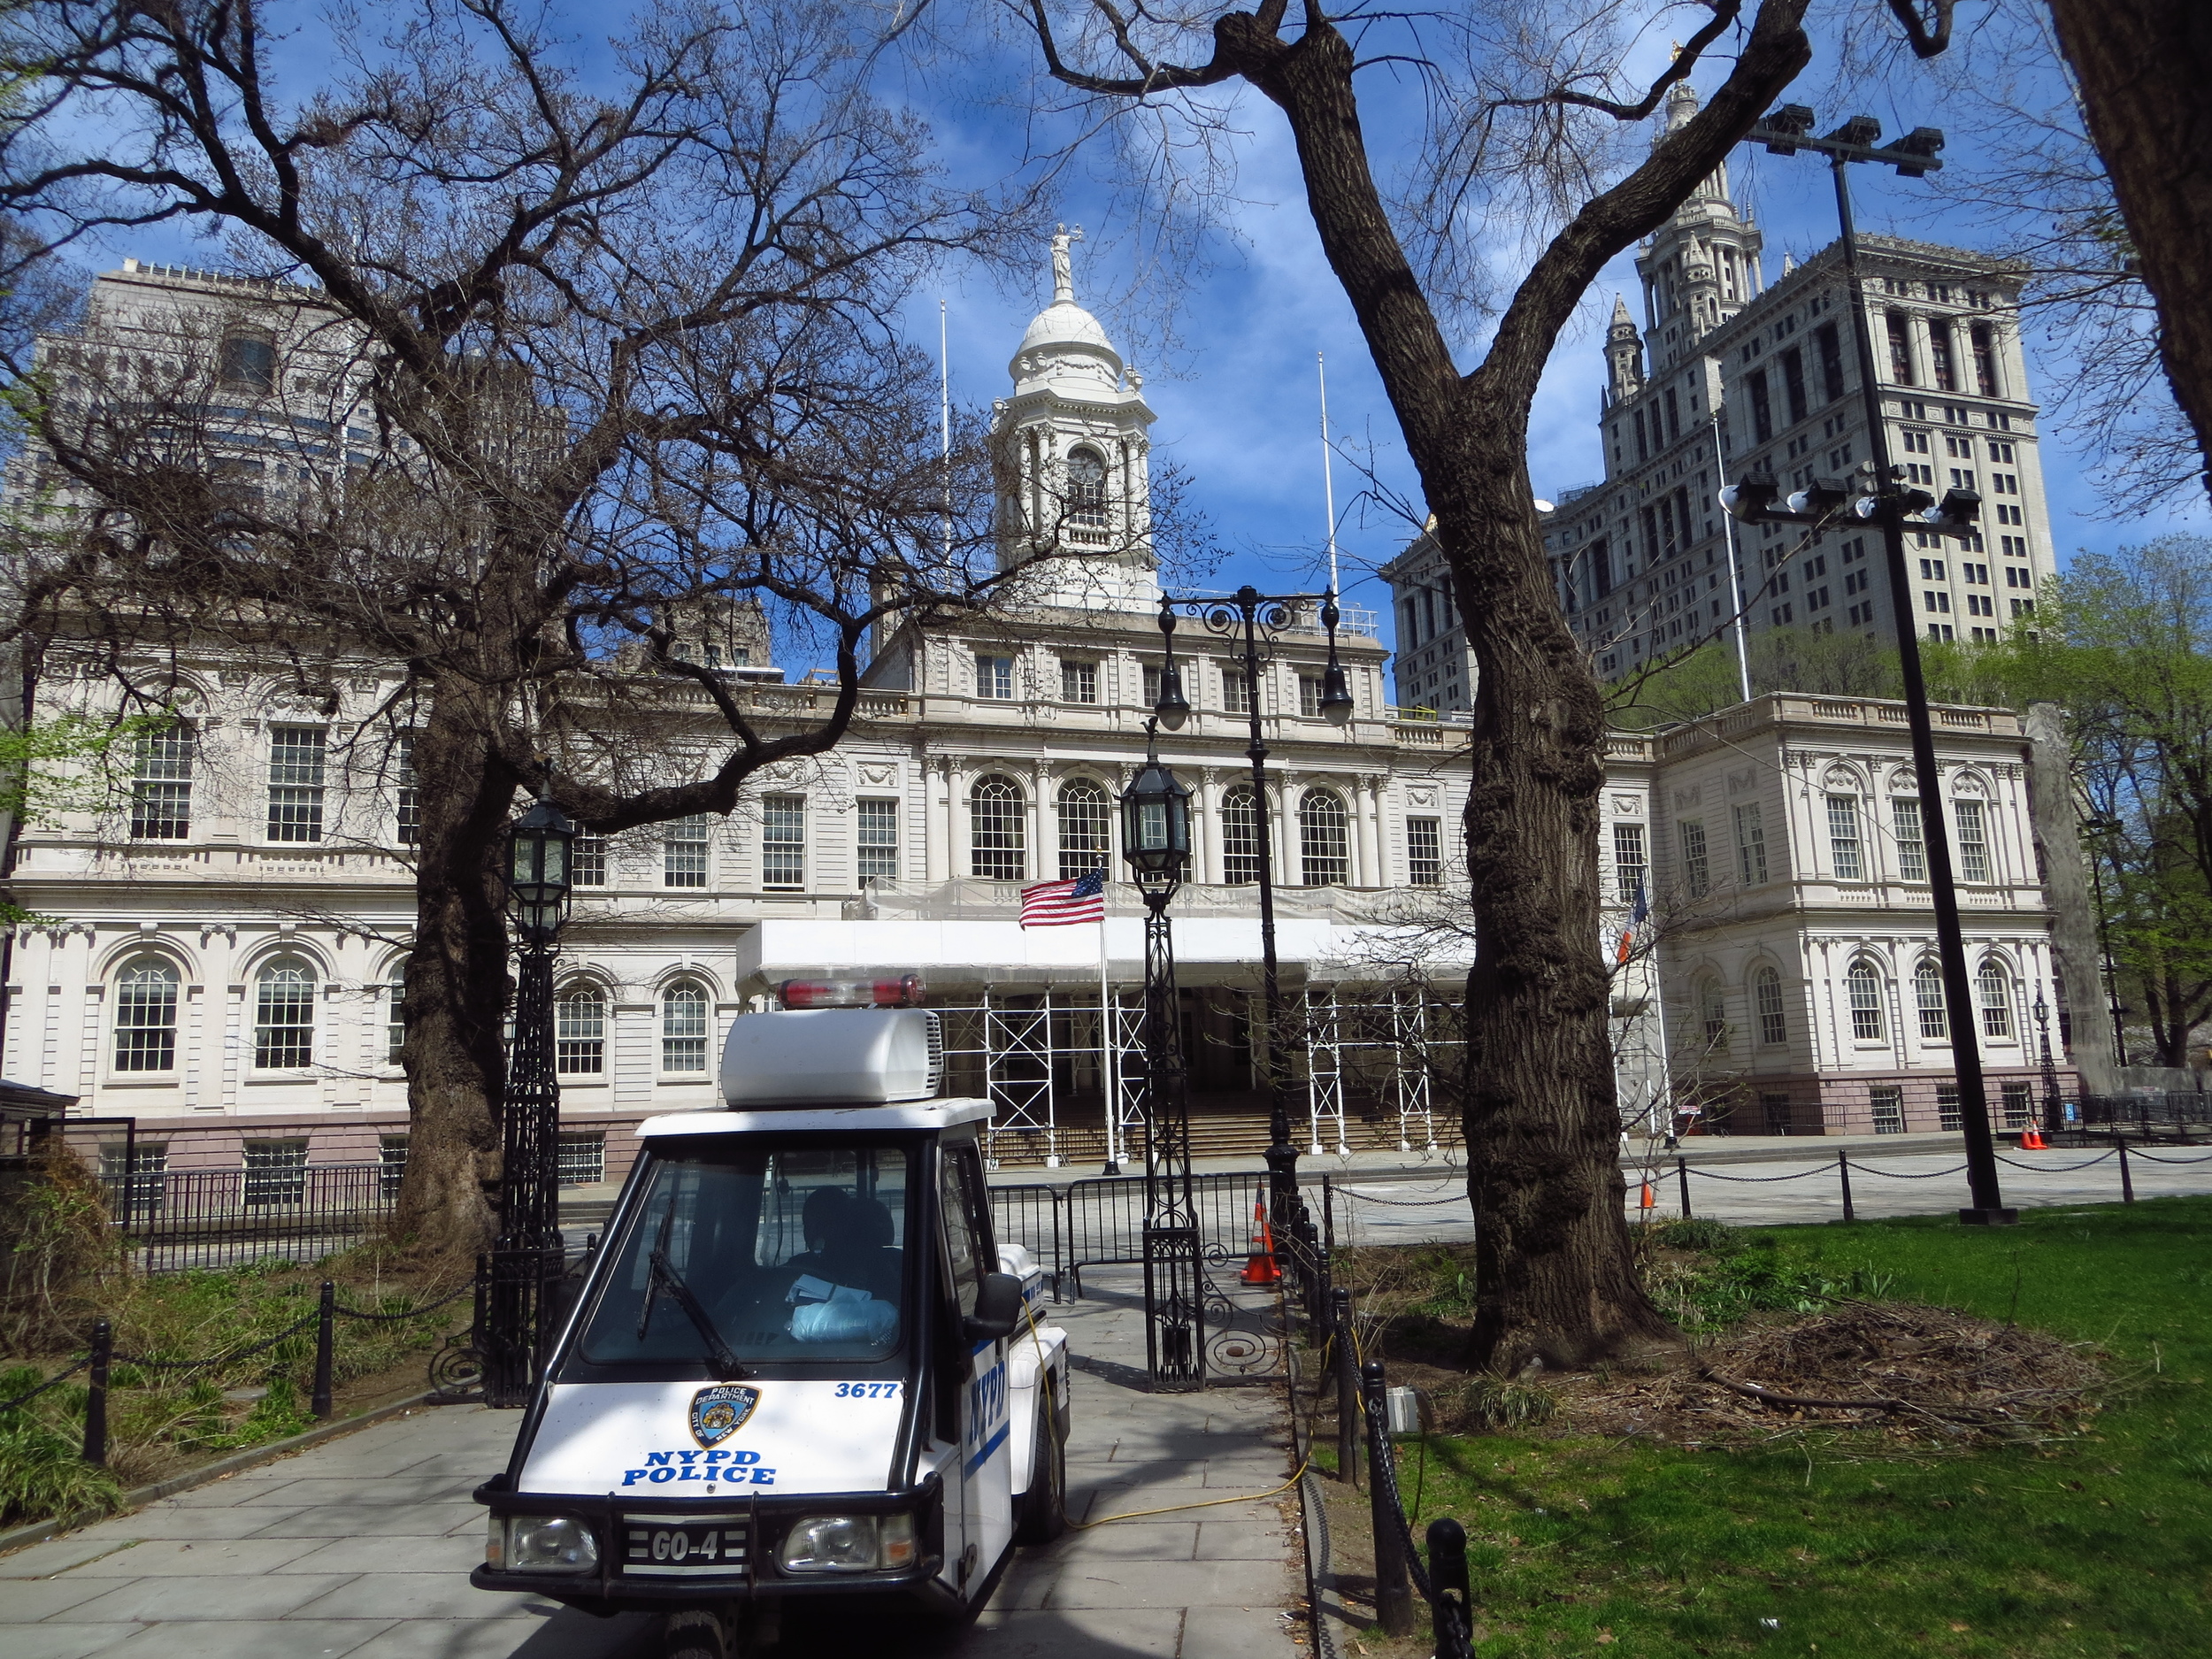 New York City Hall (b. 1812 - oldest City Hall in America still in use)